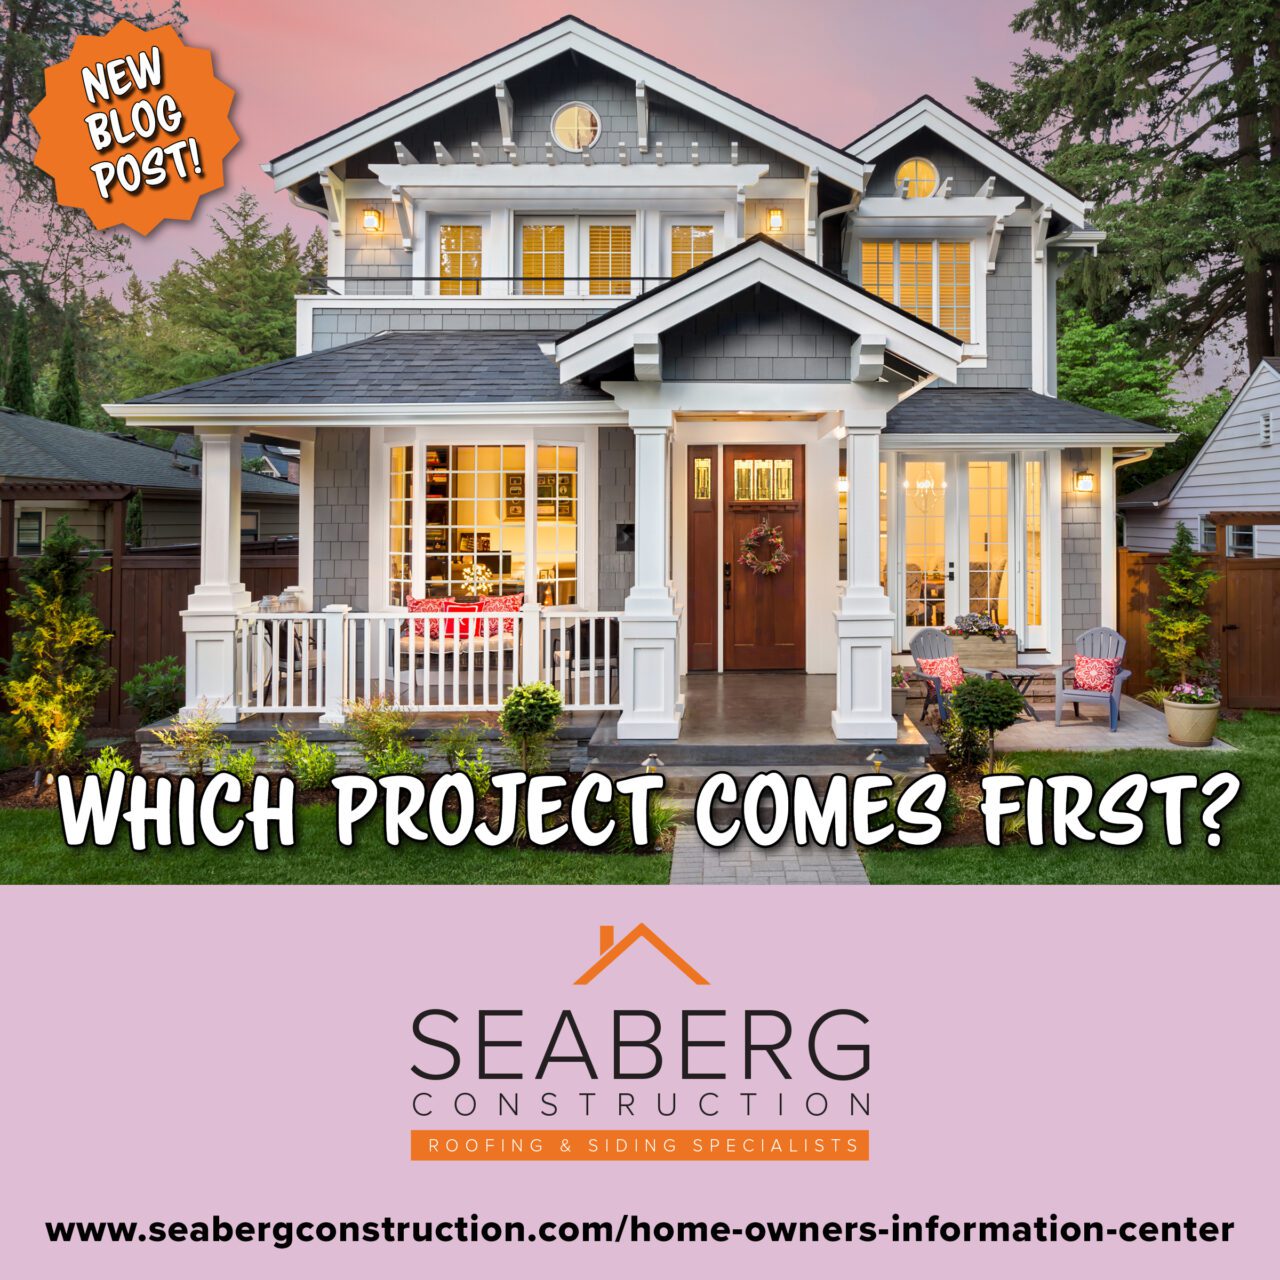 Seaberg Construction Blog: Which Project Comes First?